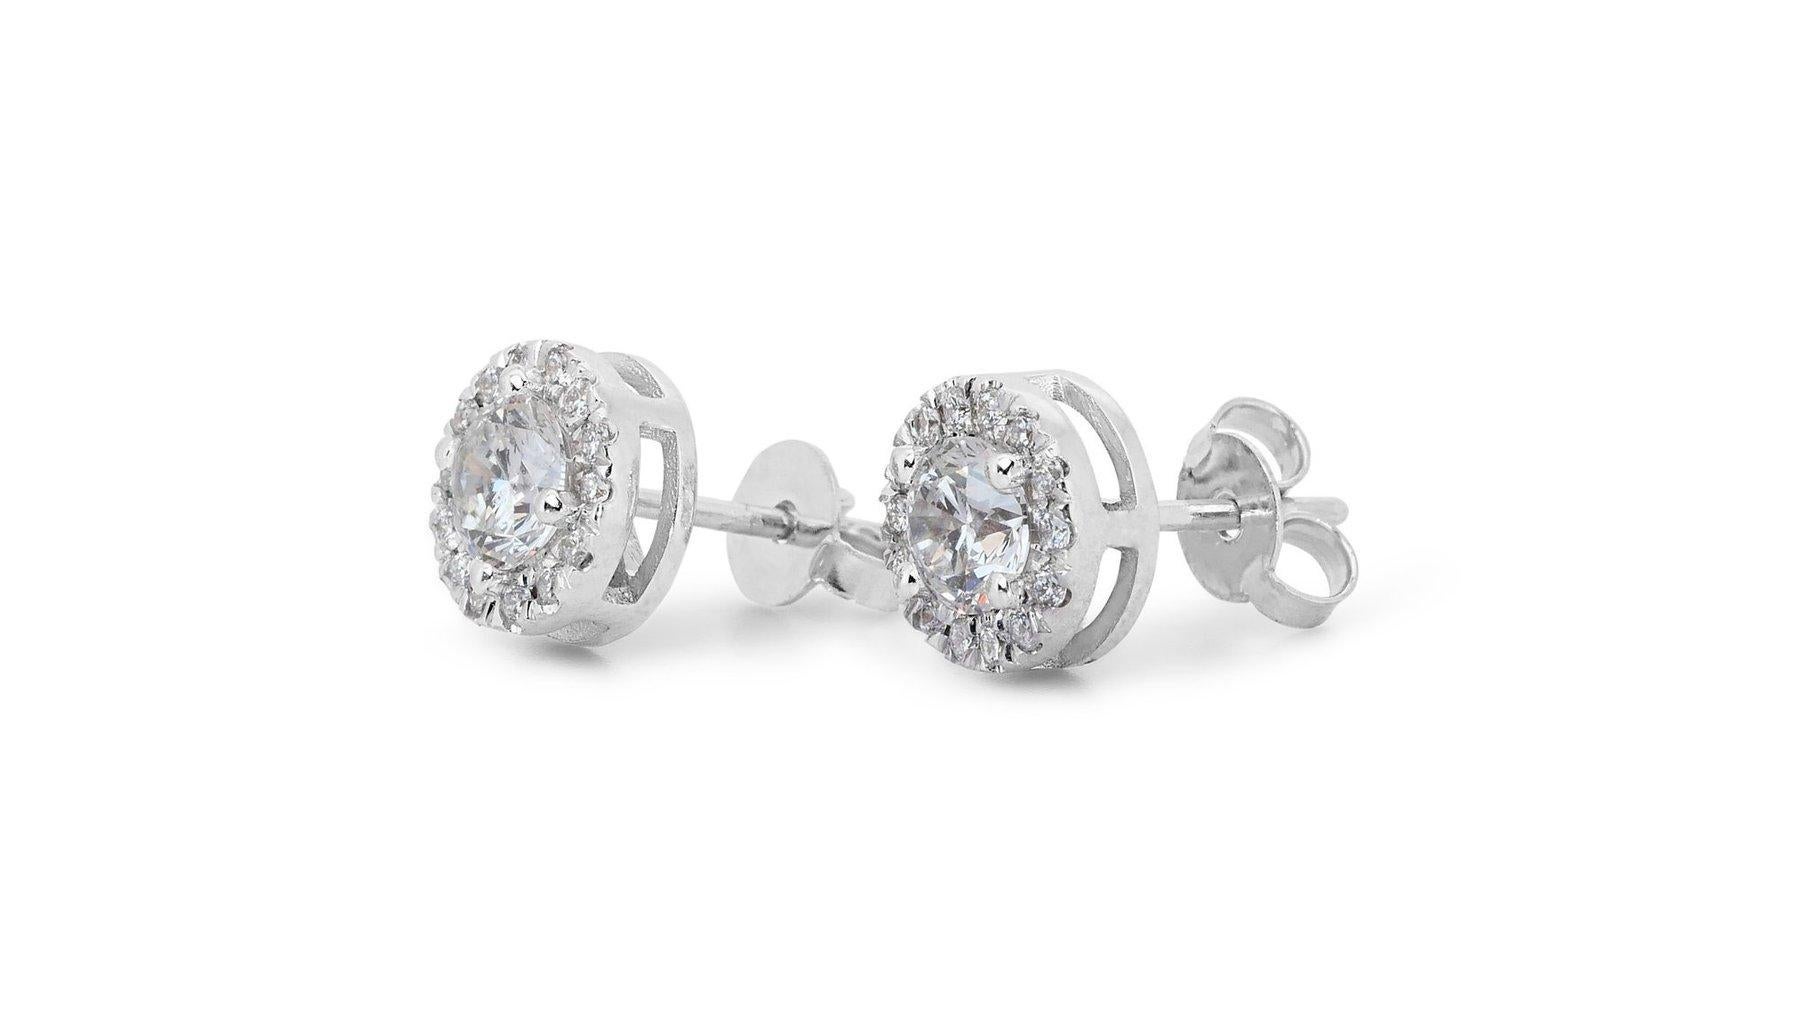 Round Cut Elegant 1.68ct Diamond Halo Stud Earrings in 18k White Gold - GIA Certified For Sale